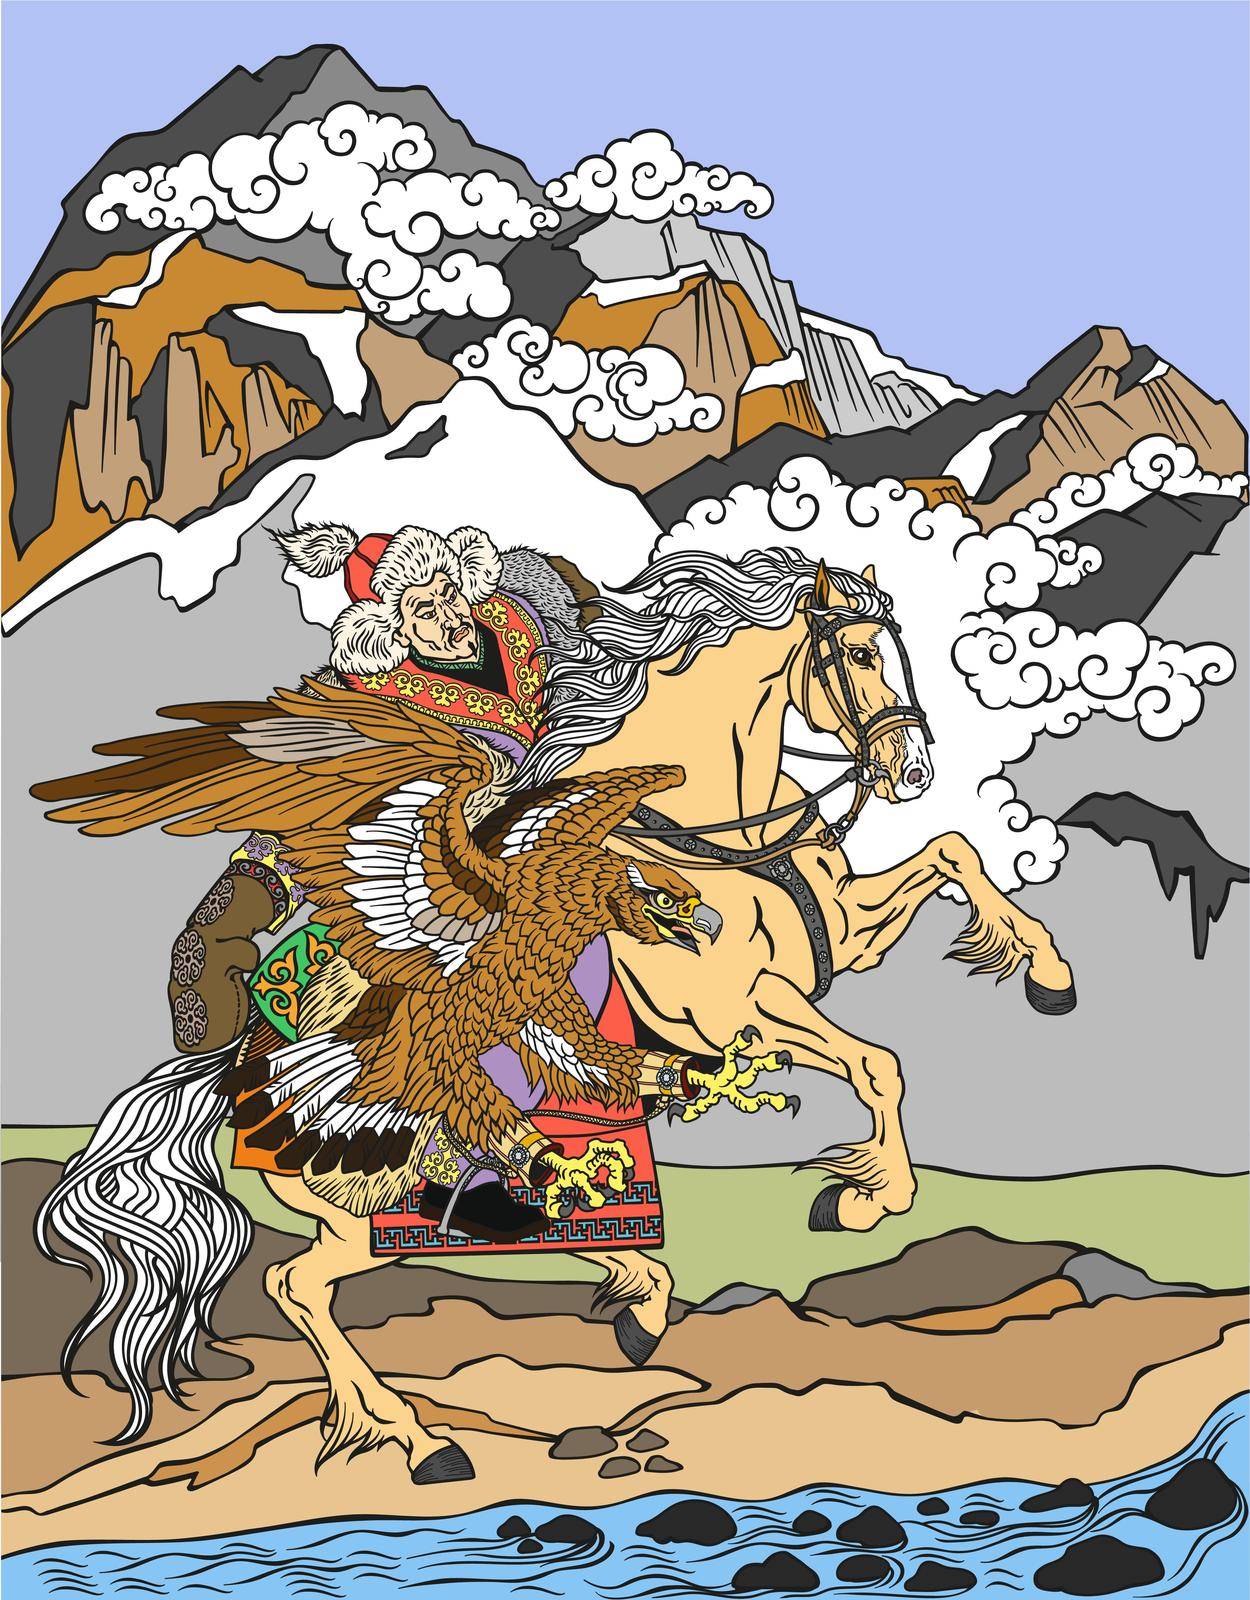 Hunting with a golden eagle on a horse. Illustration by insima